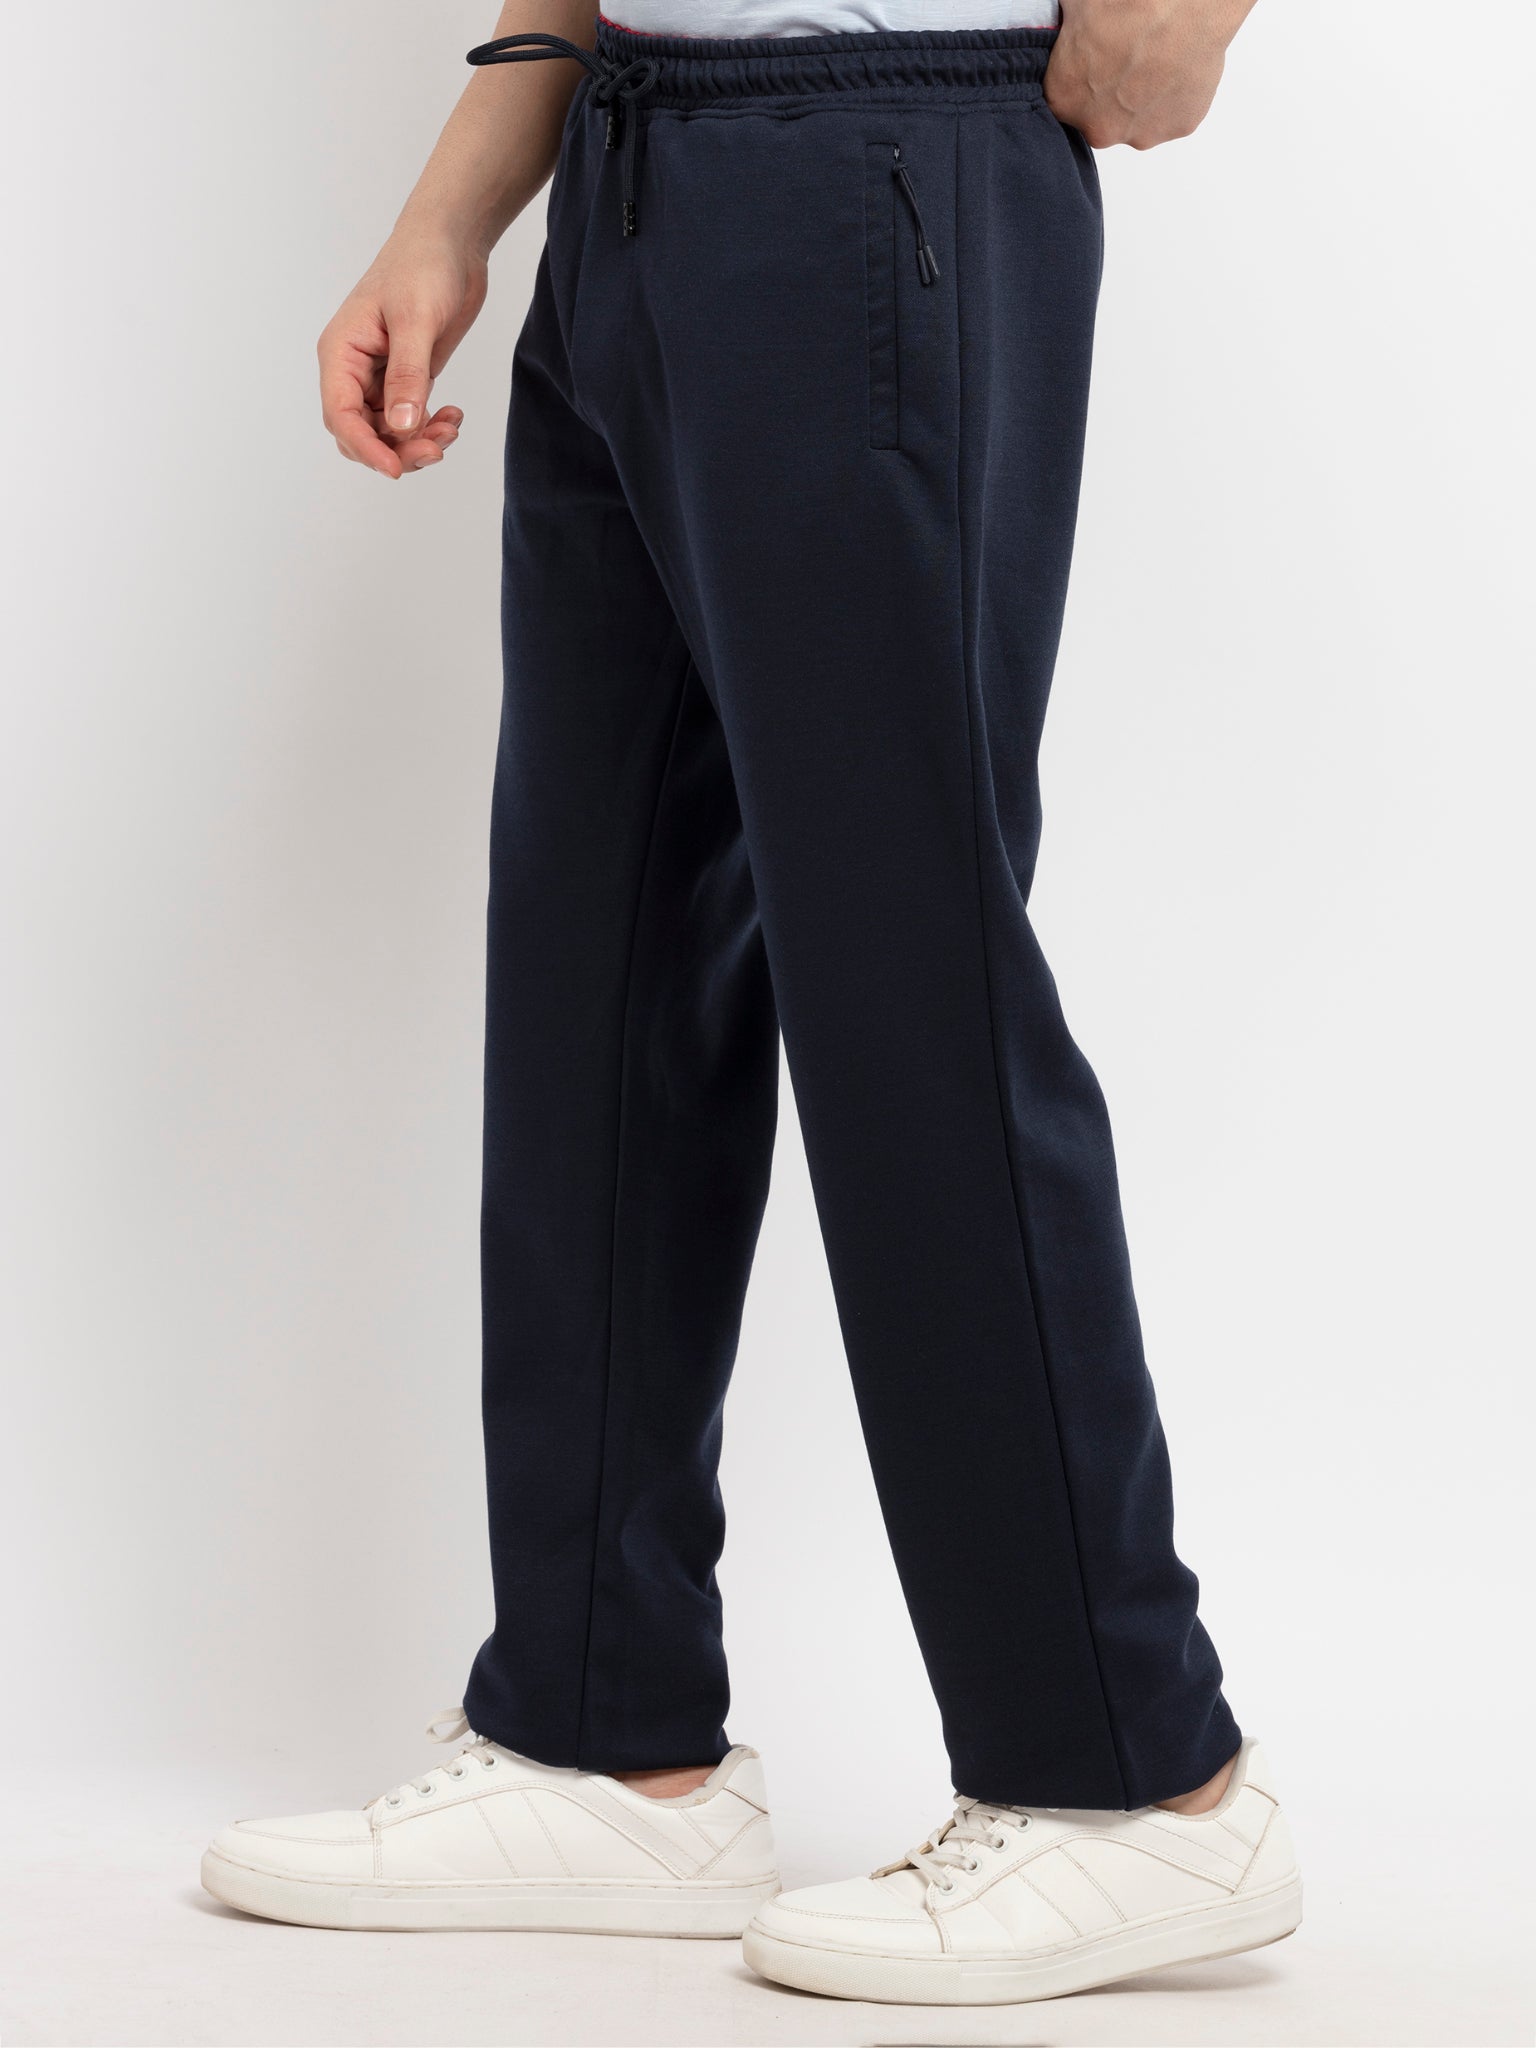 Buy Kappa Printed Track Pants with Drawstring Closure and Pockets Online  for Girls | Centrepoint KSA